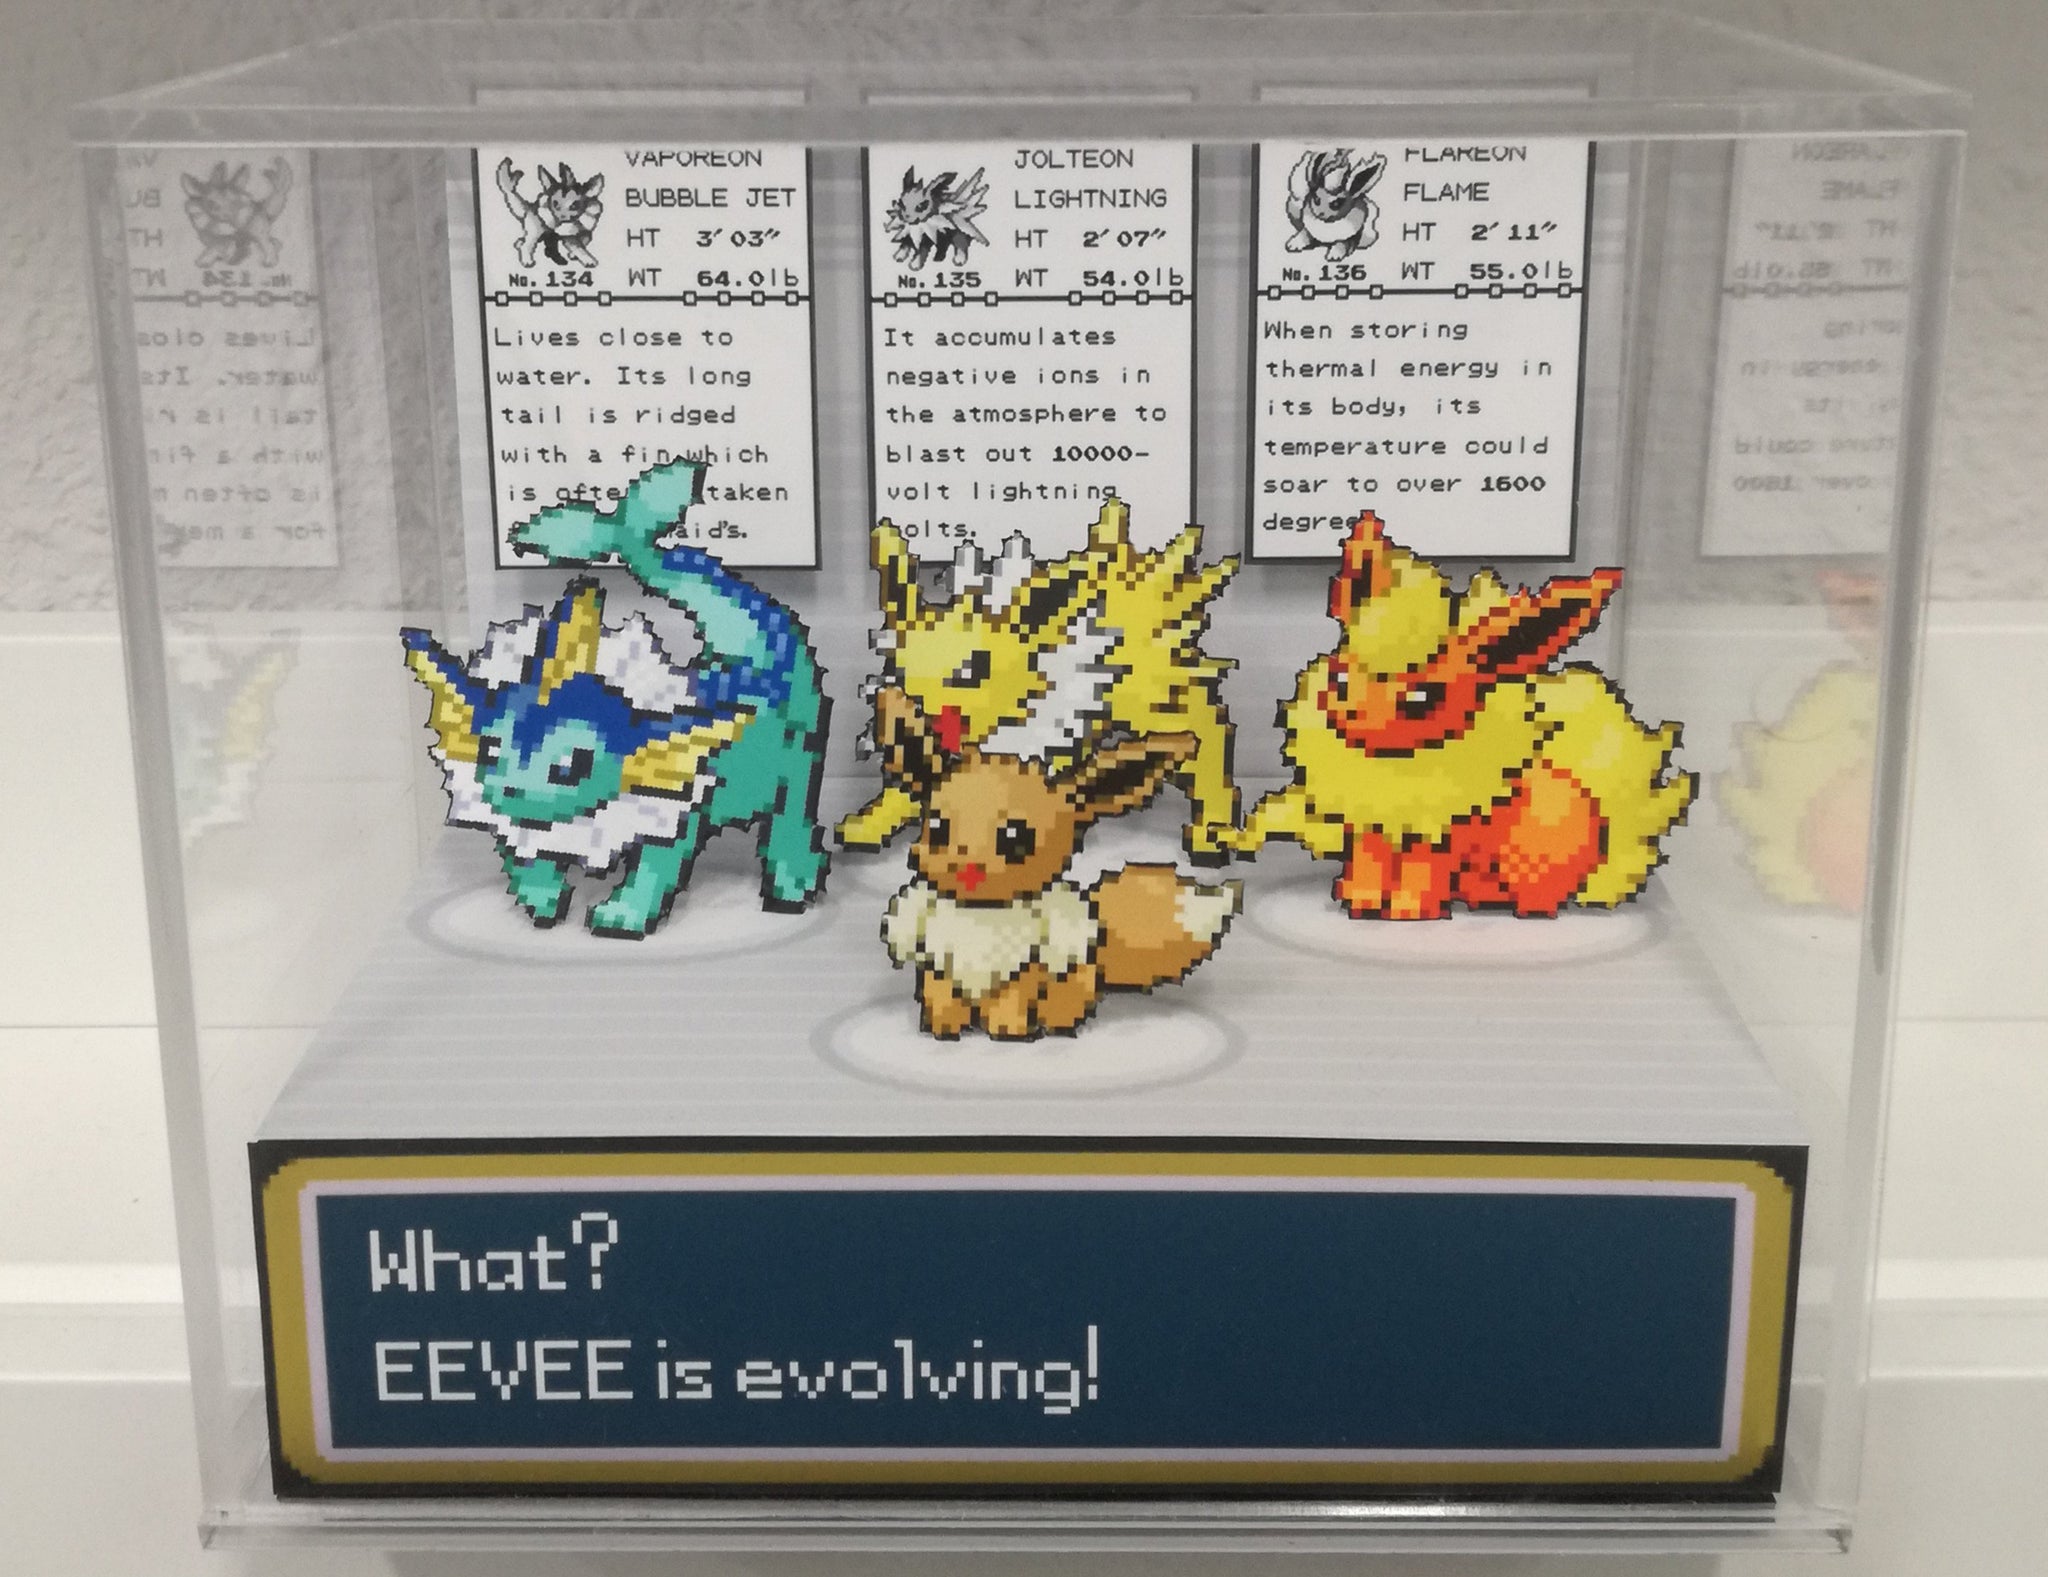 How To Get All Eeveevolution In Pokemon Fire Red/Leaf Green 